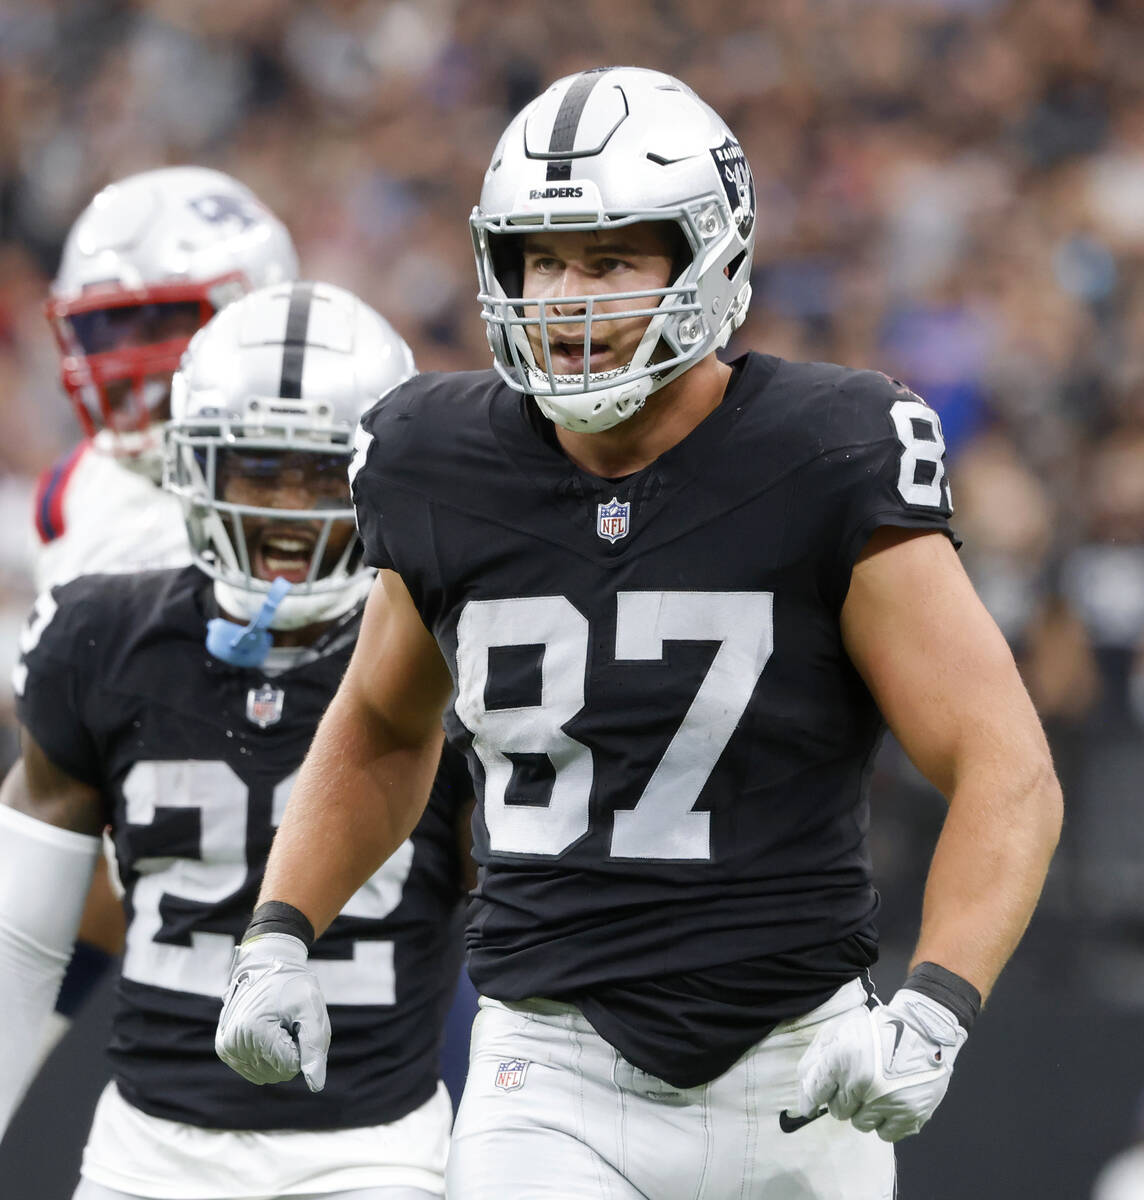 Raiders tight end Michael Mayer (87) reacts after gaining yards against New England Patriots du ...